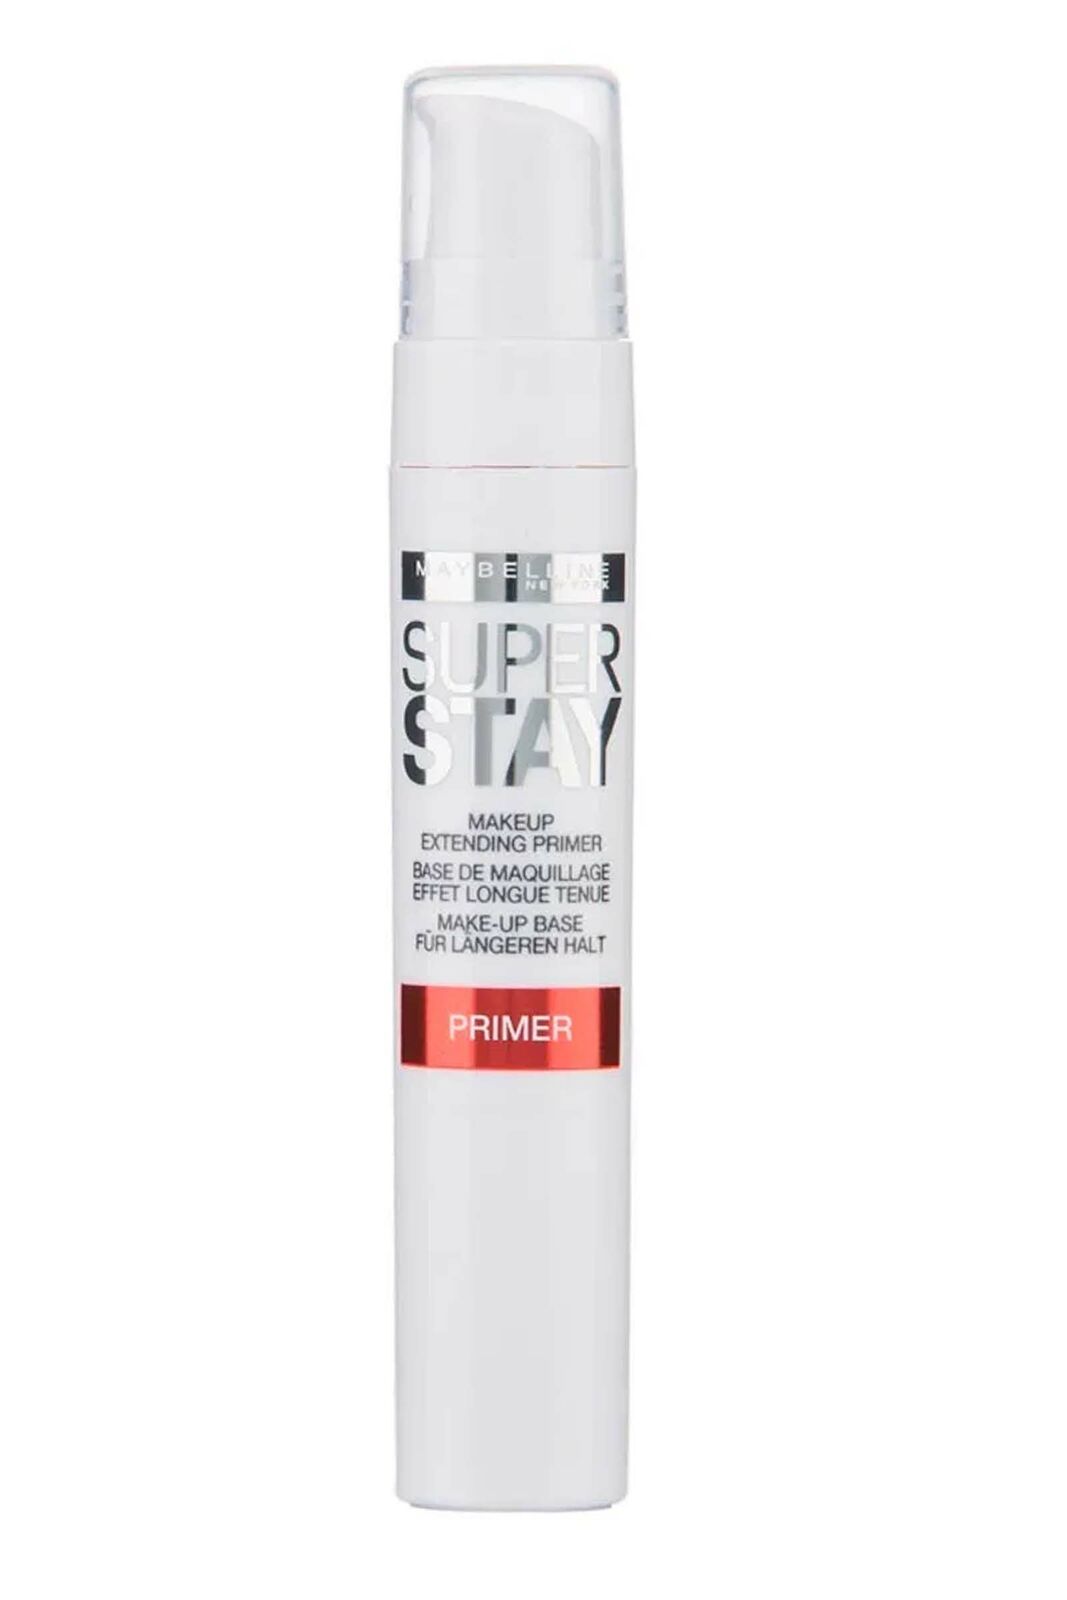 Maybelline Super Stay Makeup Extending Primer 20ml-Evens and Smoothes